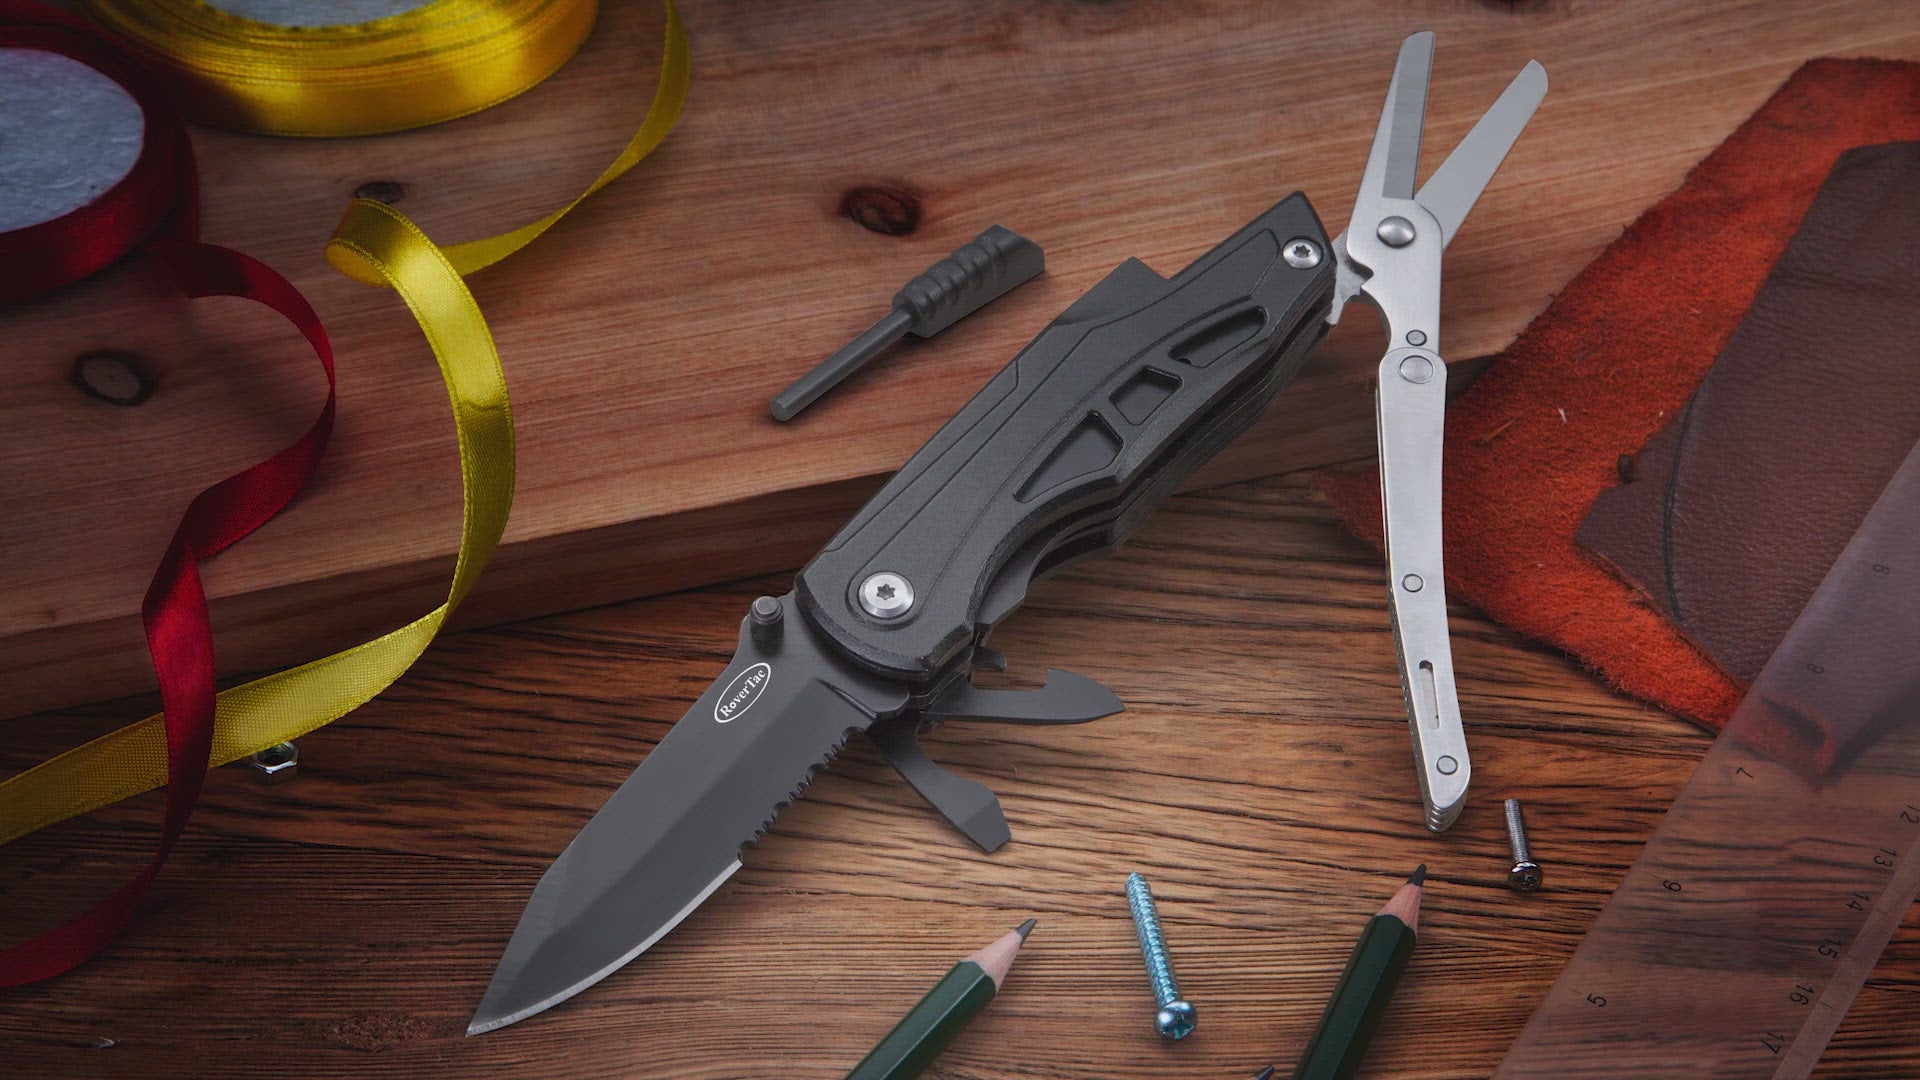 RoverTac Pocket Knife Multi Tool Tactical Knife Multitool Knife with Scissors Bottle and Can Opener Fire Starter Whistle Screwdriver Perfect for Camping Hiking Survival Christmas Gifts for Men Dad